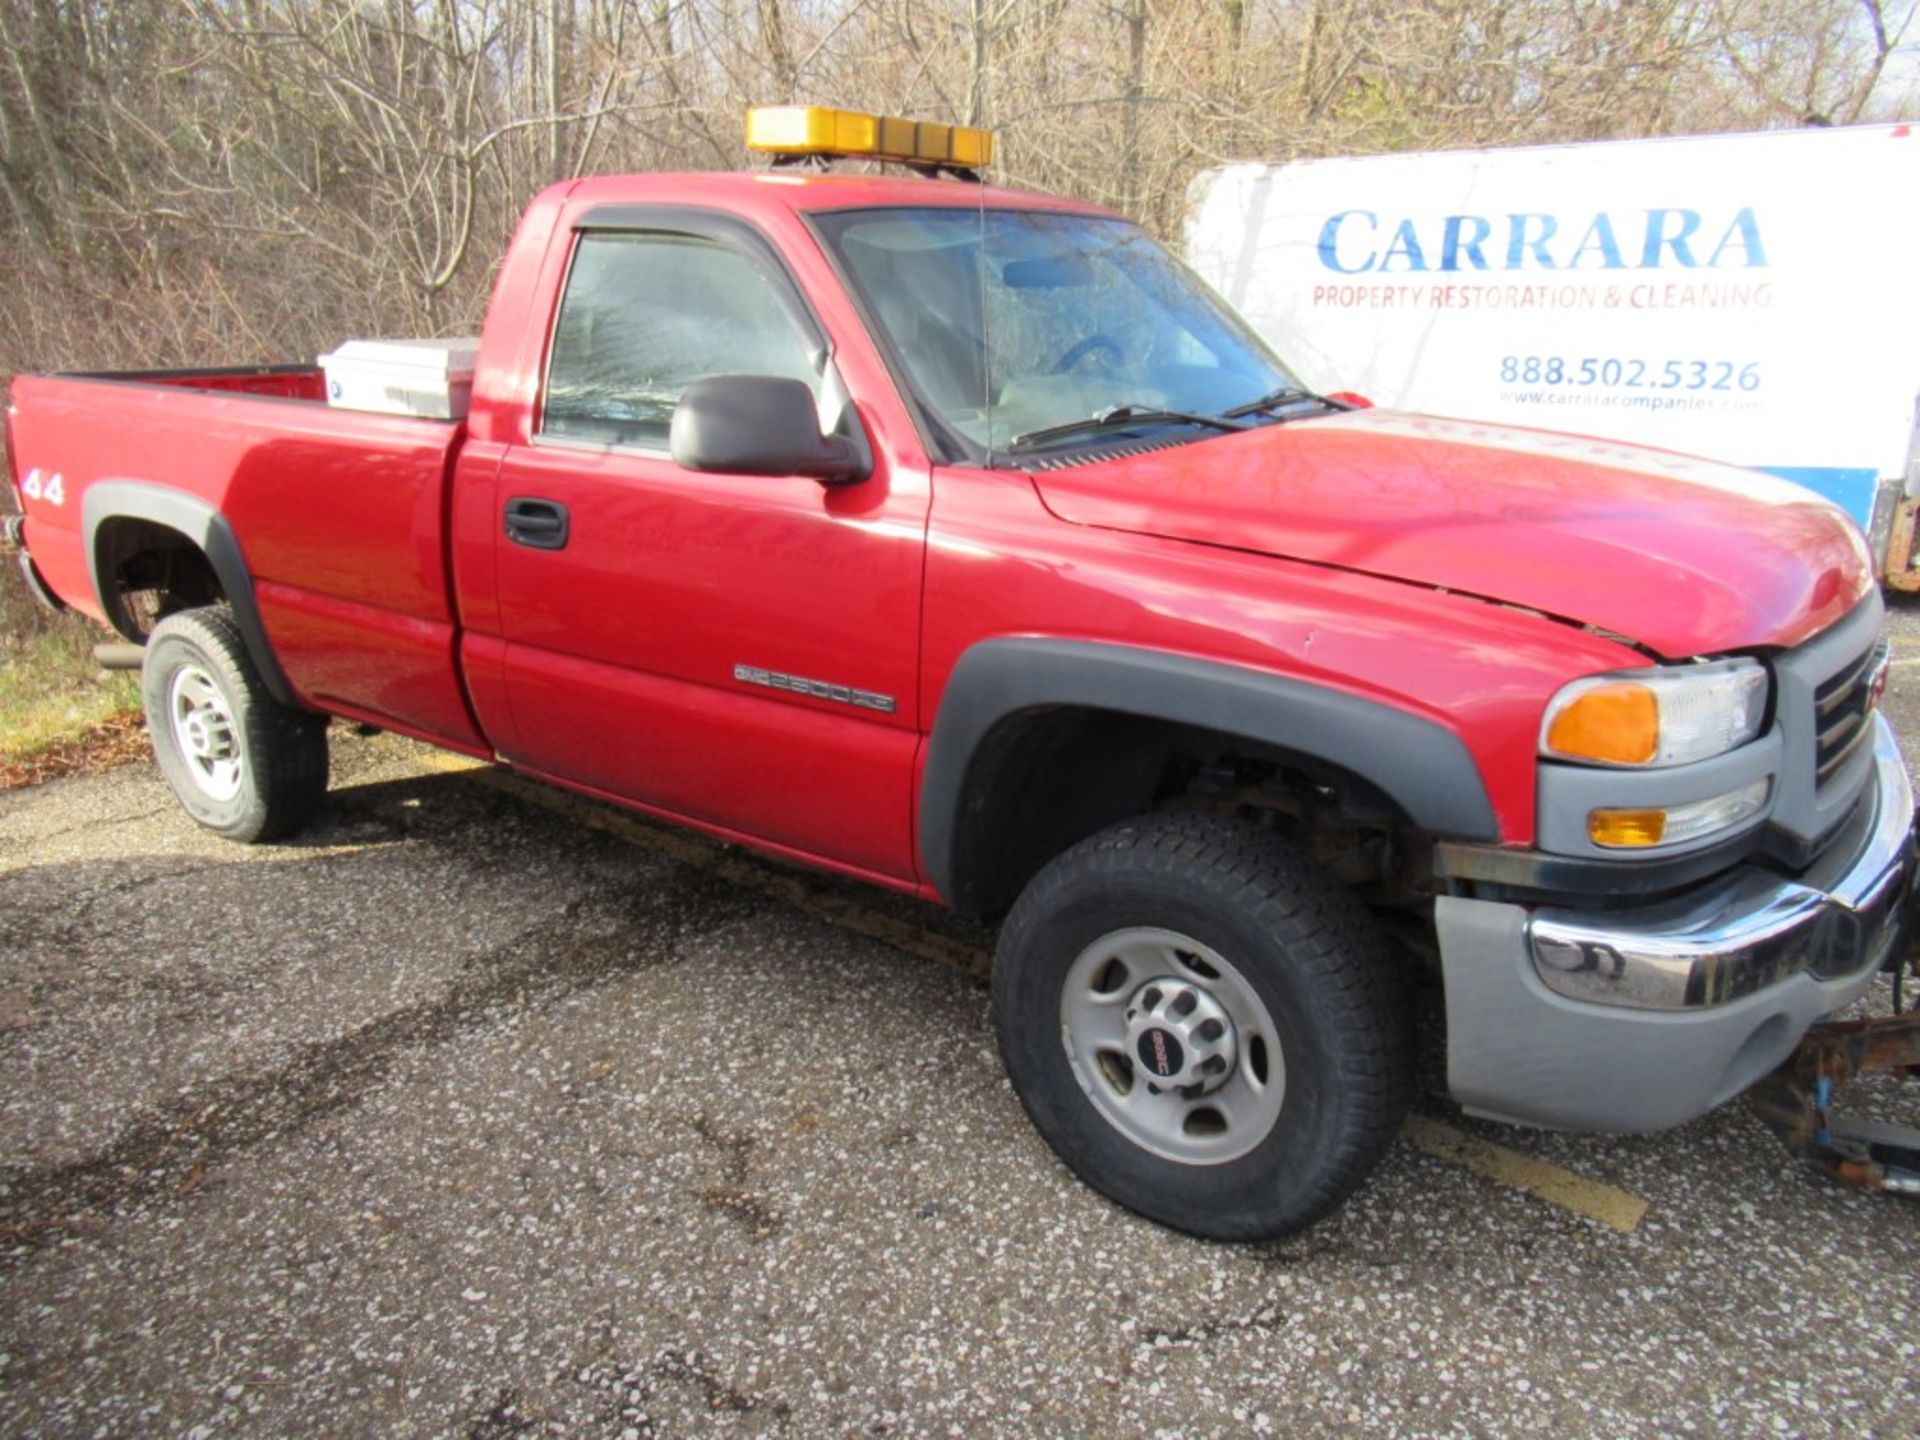 2005 GMC 2500 HD Pickup with Snow Plow, VIN 1GTHK24U05E308334, 4 WD, Automatic, AM/FM, Started - Image 5 of 37